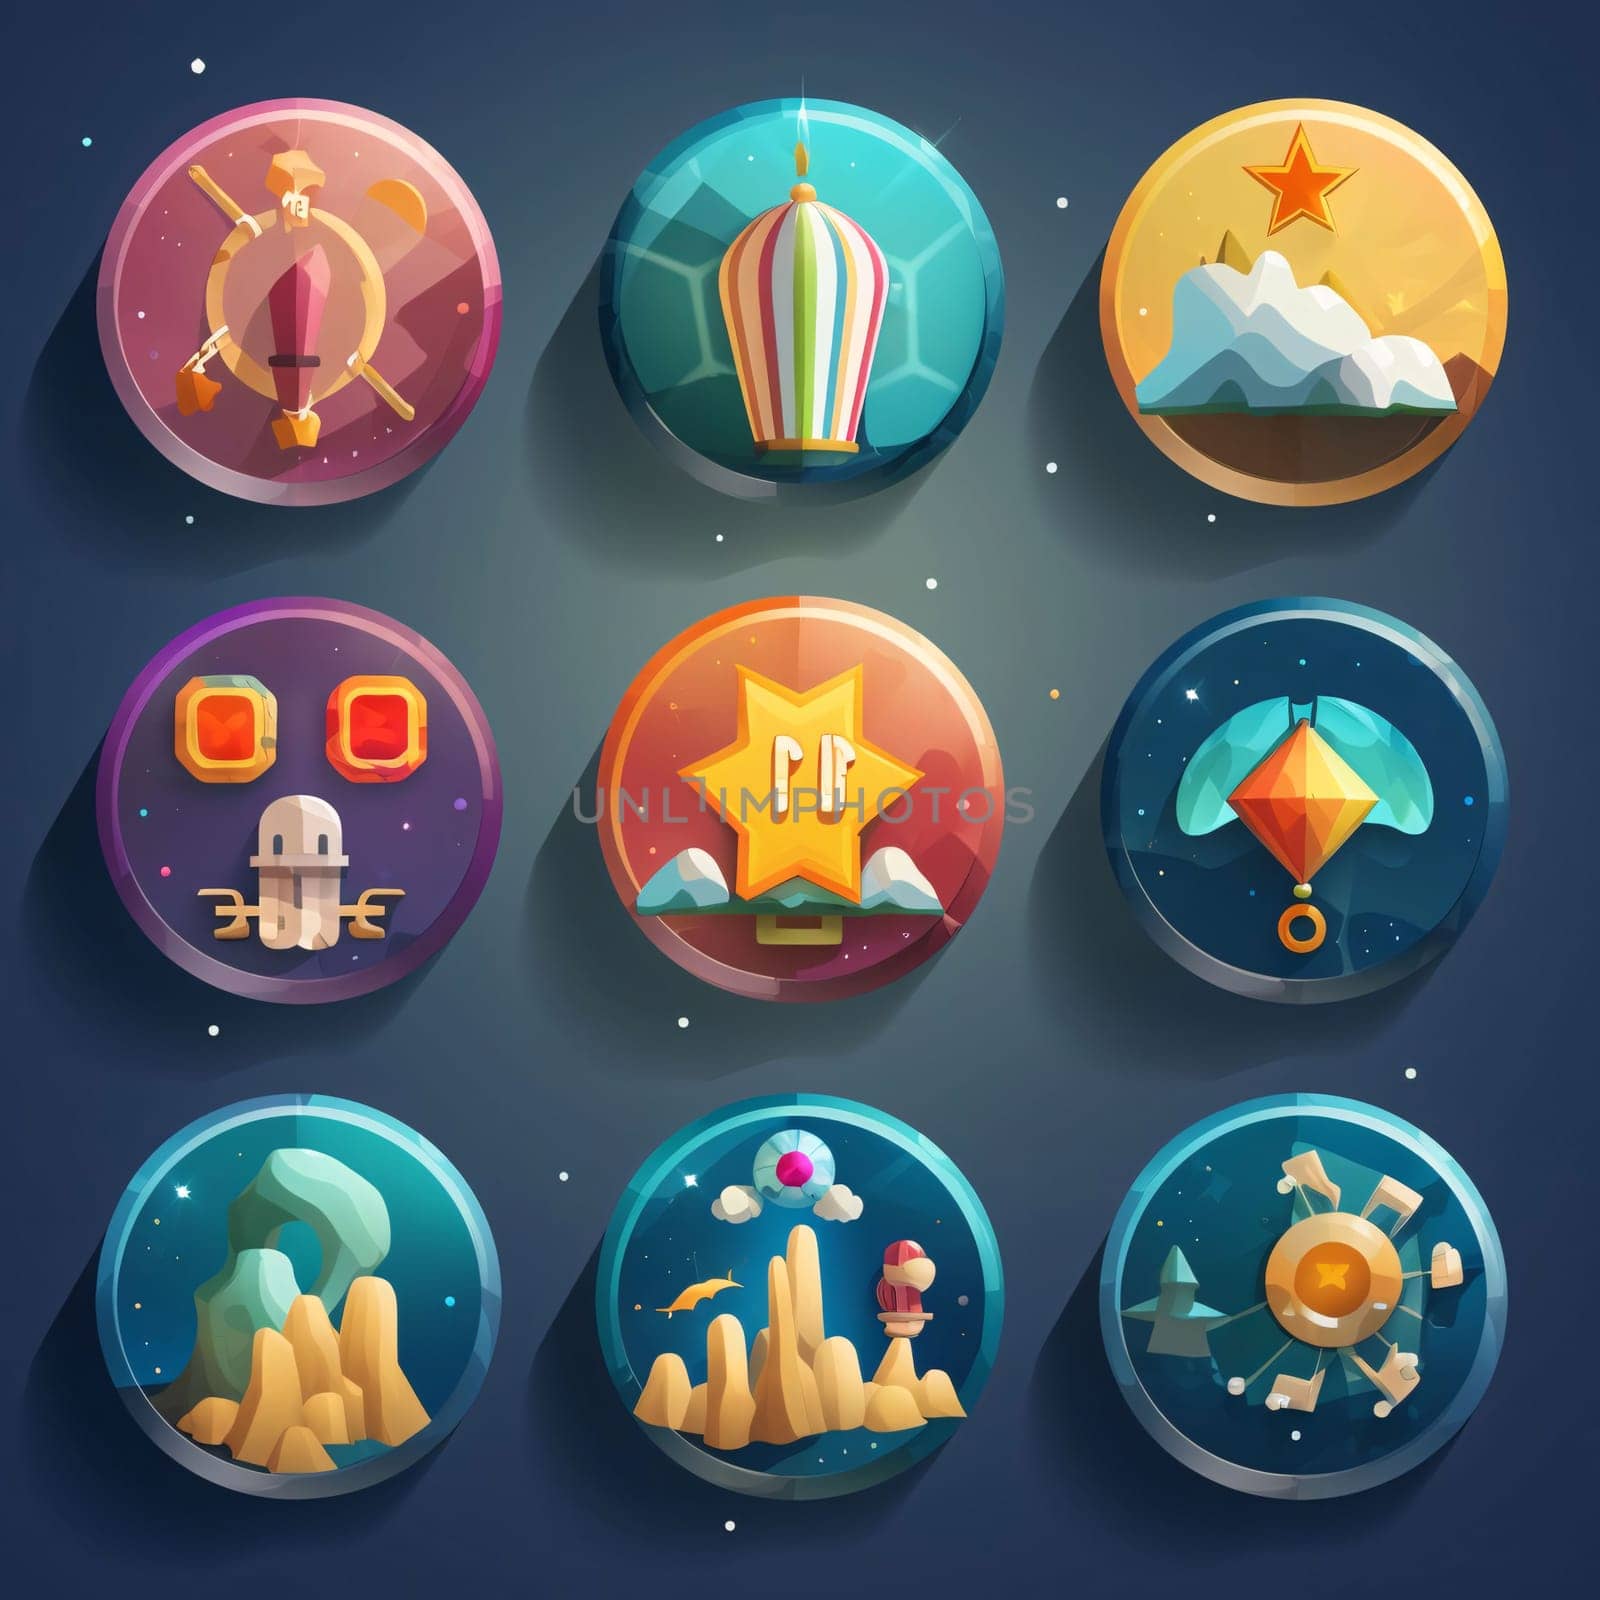 New icons collection: Cartoon space game icons set. Vector illustration of cartoon space games icons